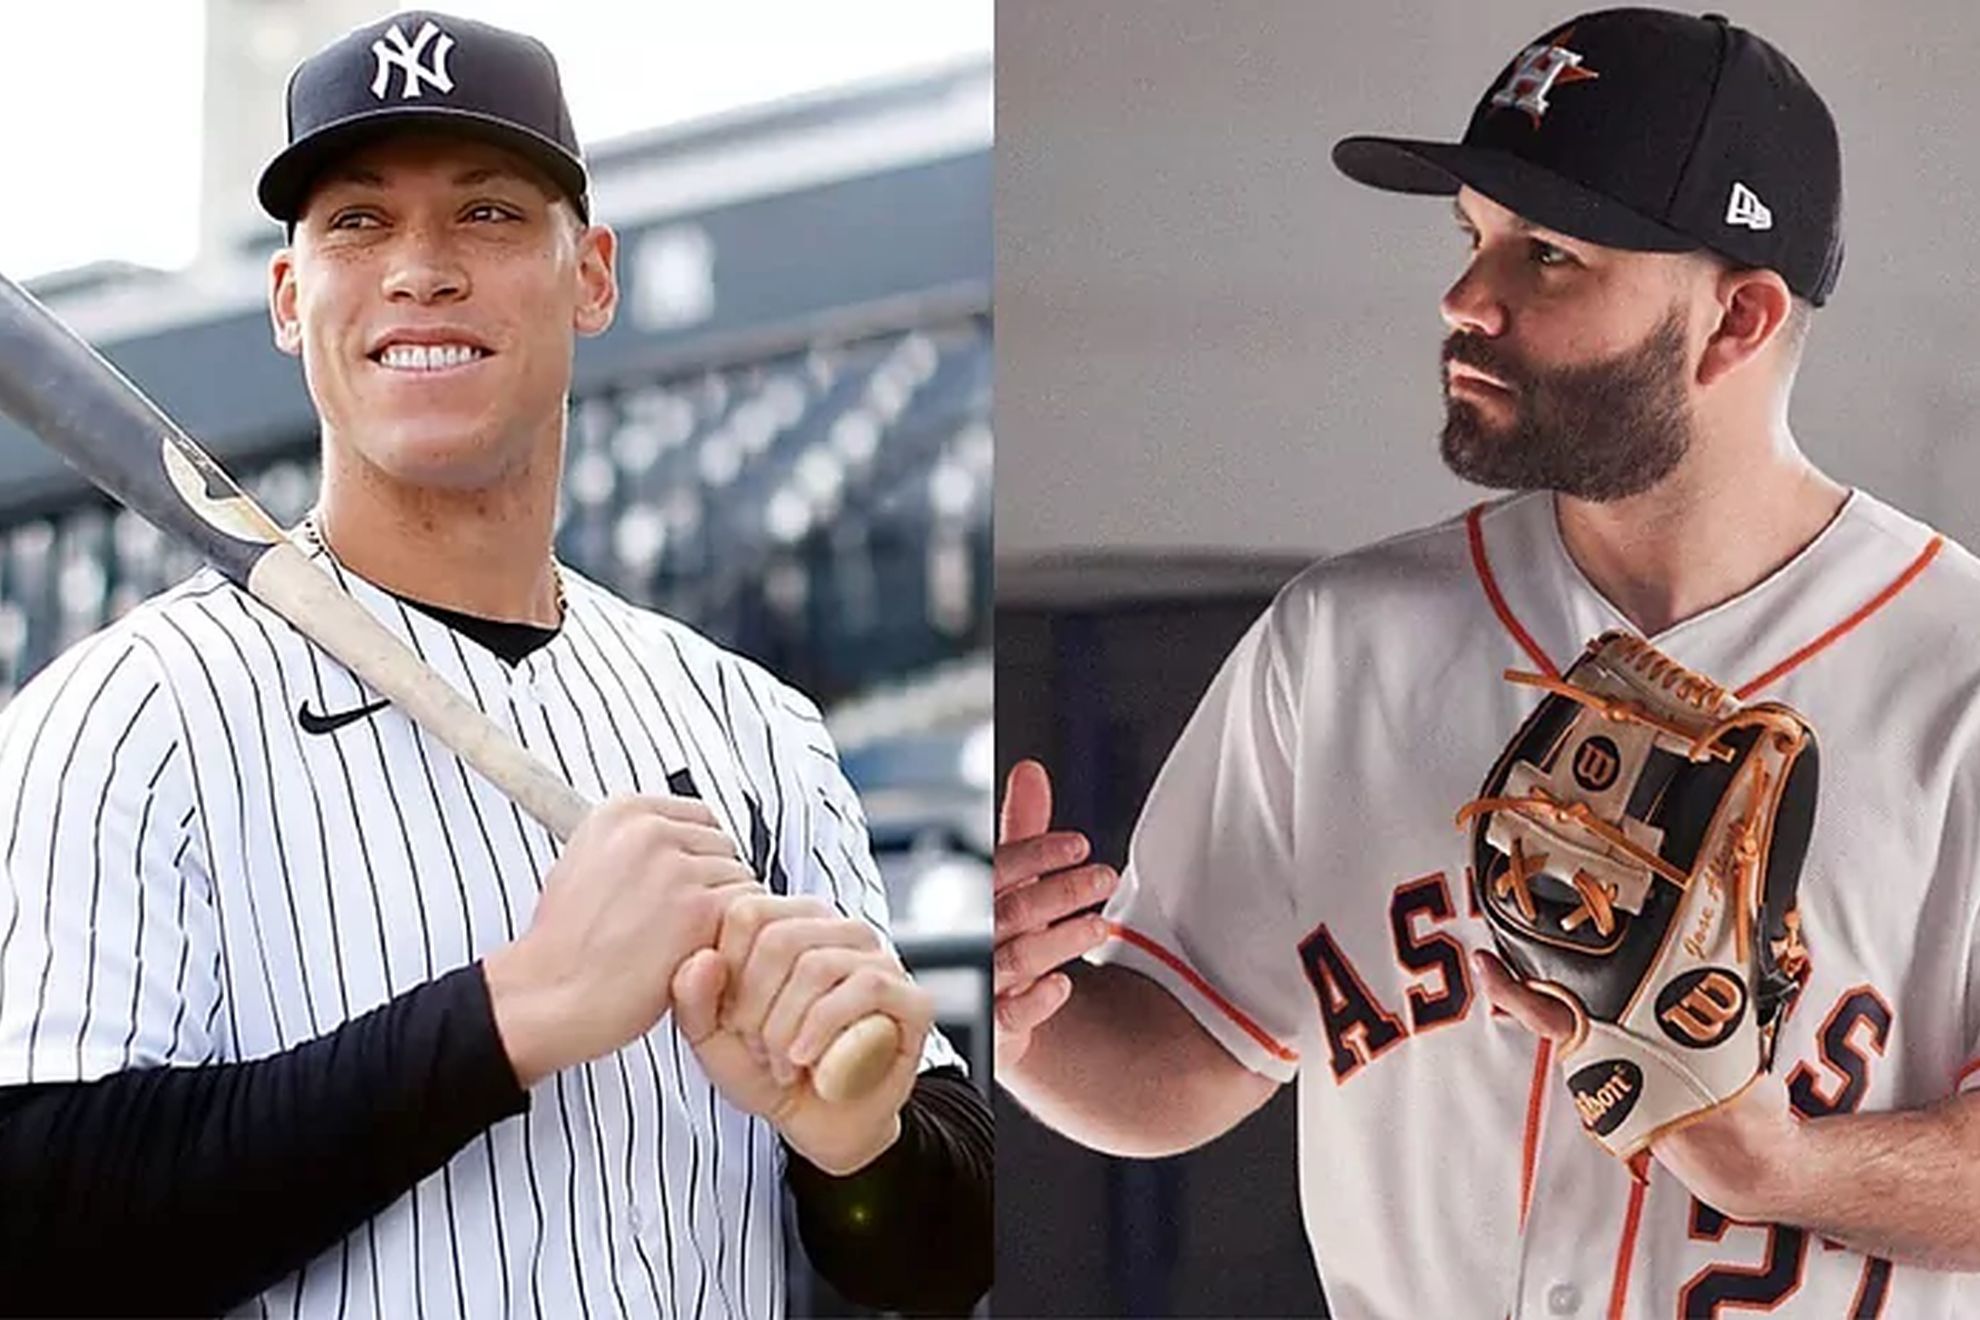 Judge of the Yankees and Altuve of the Astros